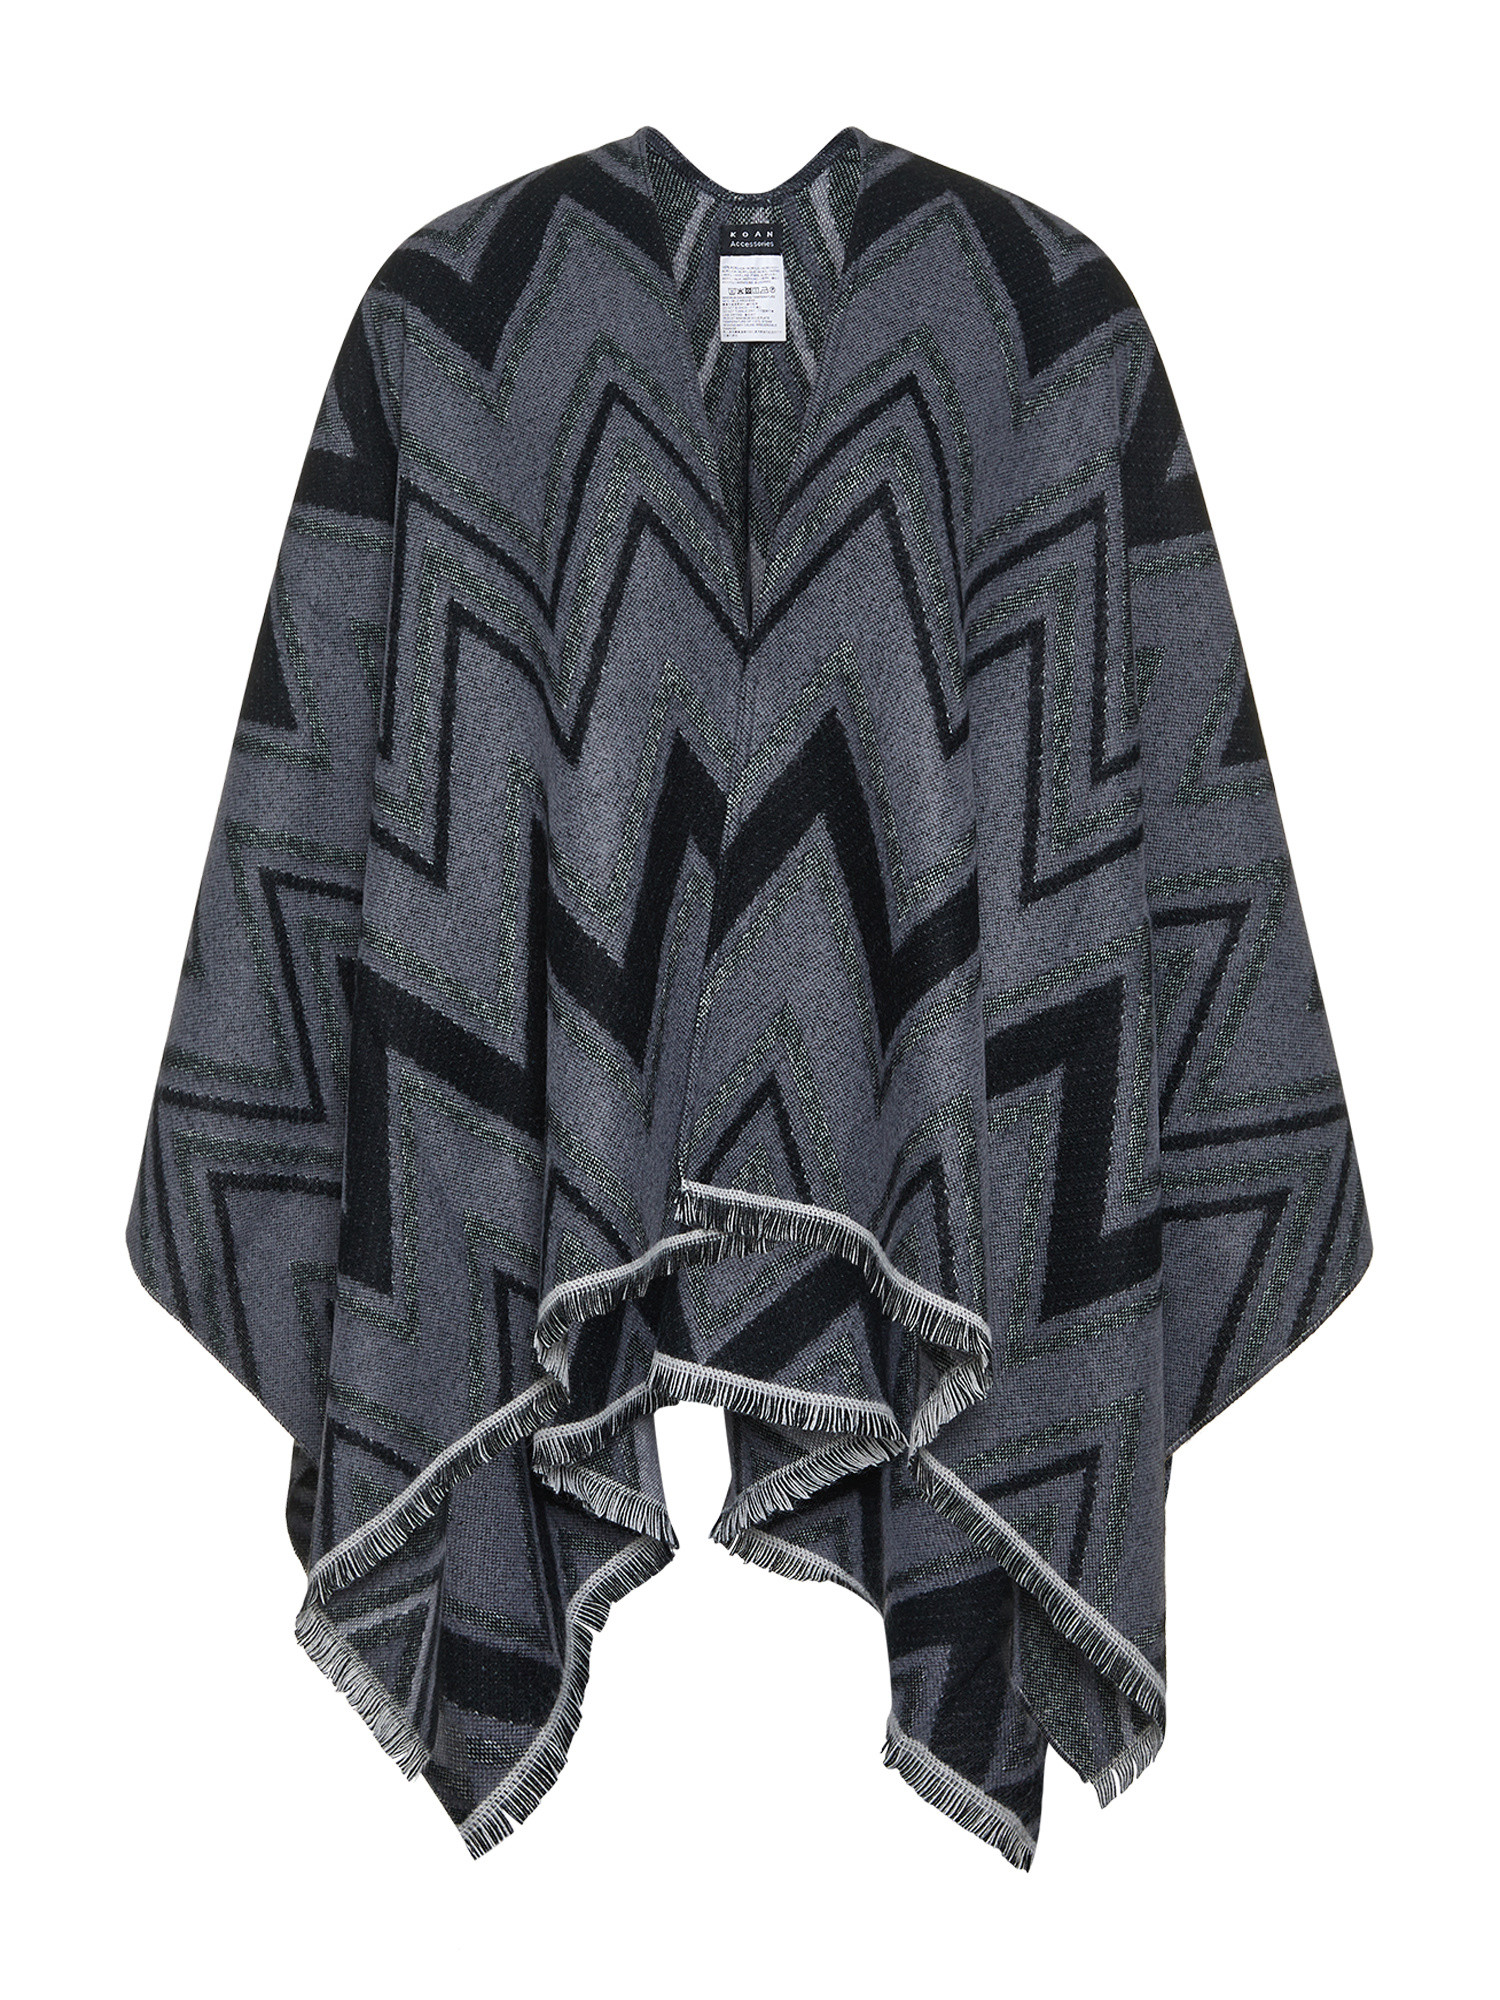 Koan - Cape with zig-zag pattern, Grey, large image number 0